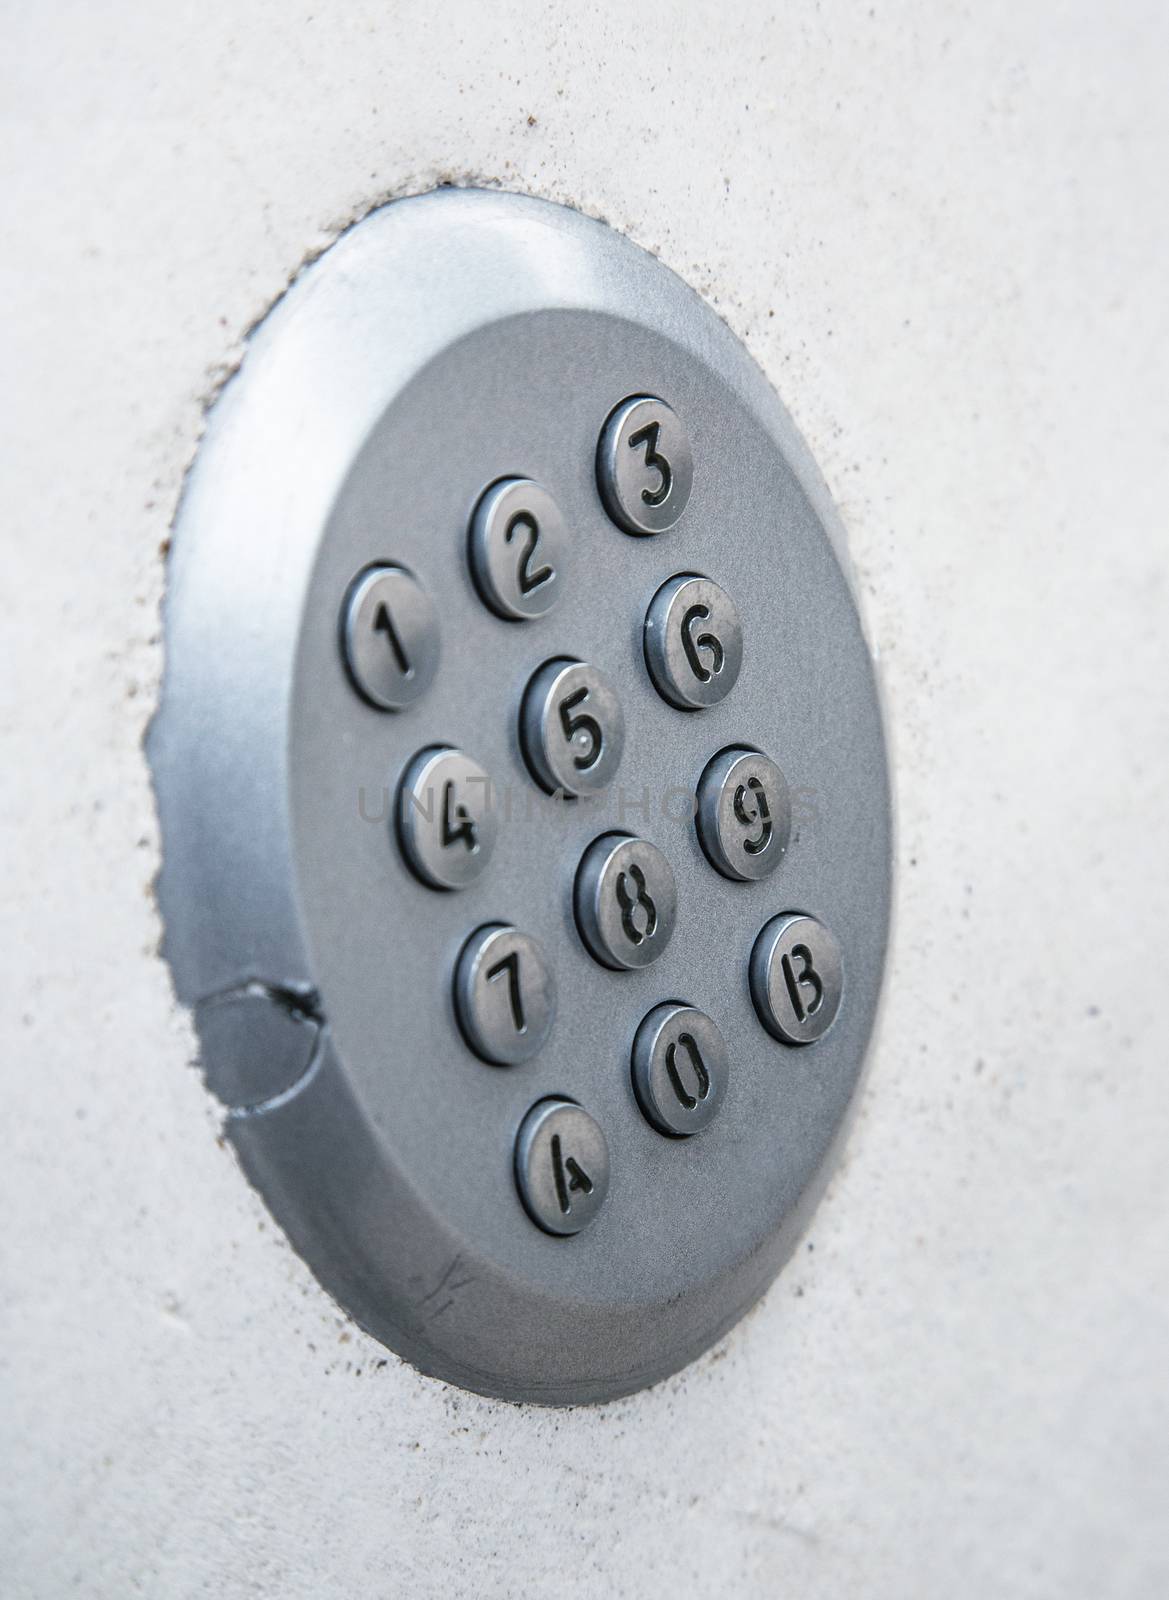 Security access with keypad on the wall by pixinoo